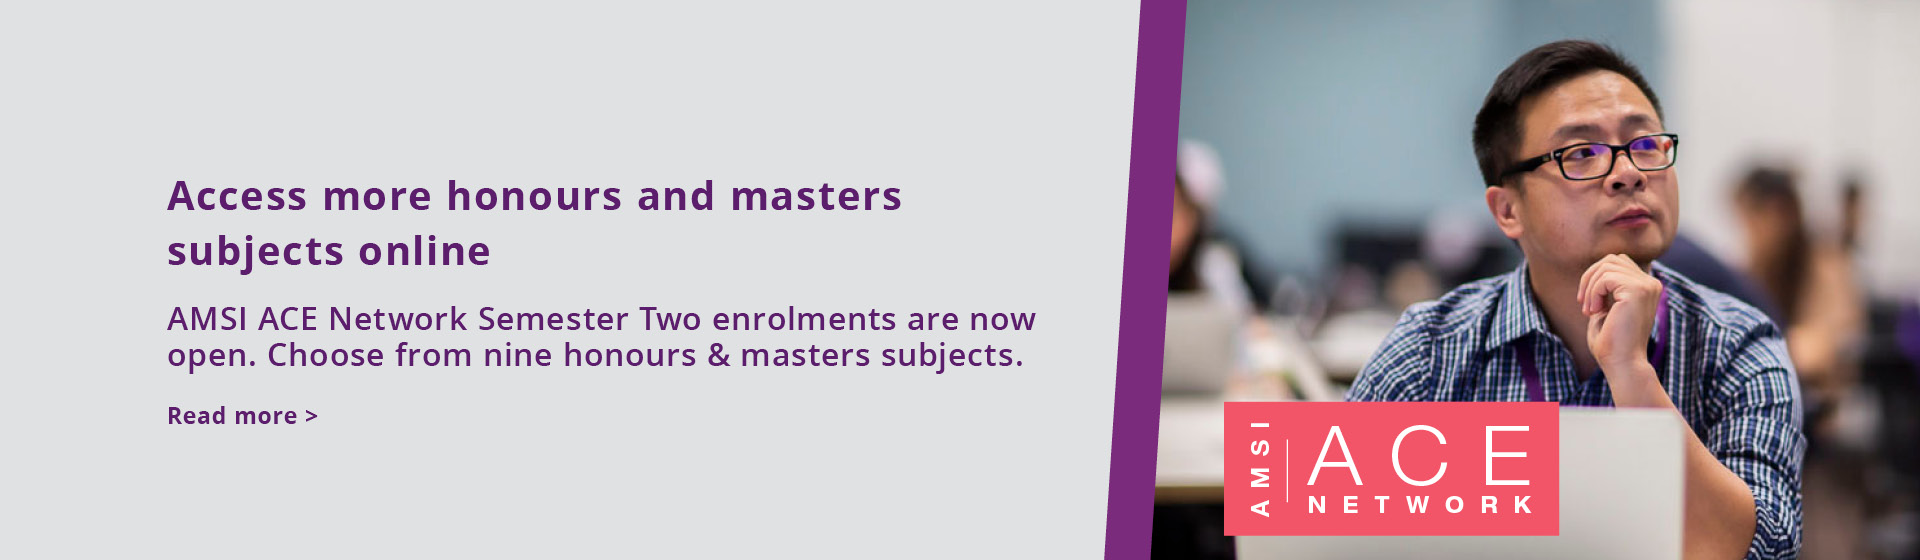 AMSI ACE Network Semester Two enrolments are now open